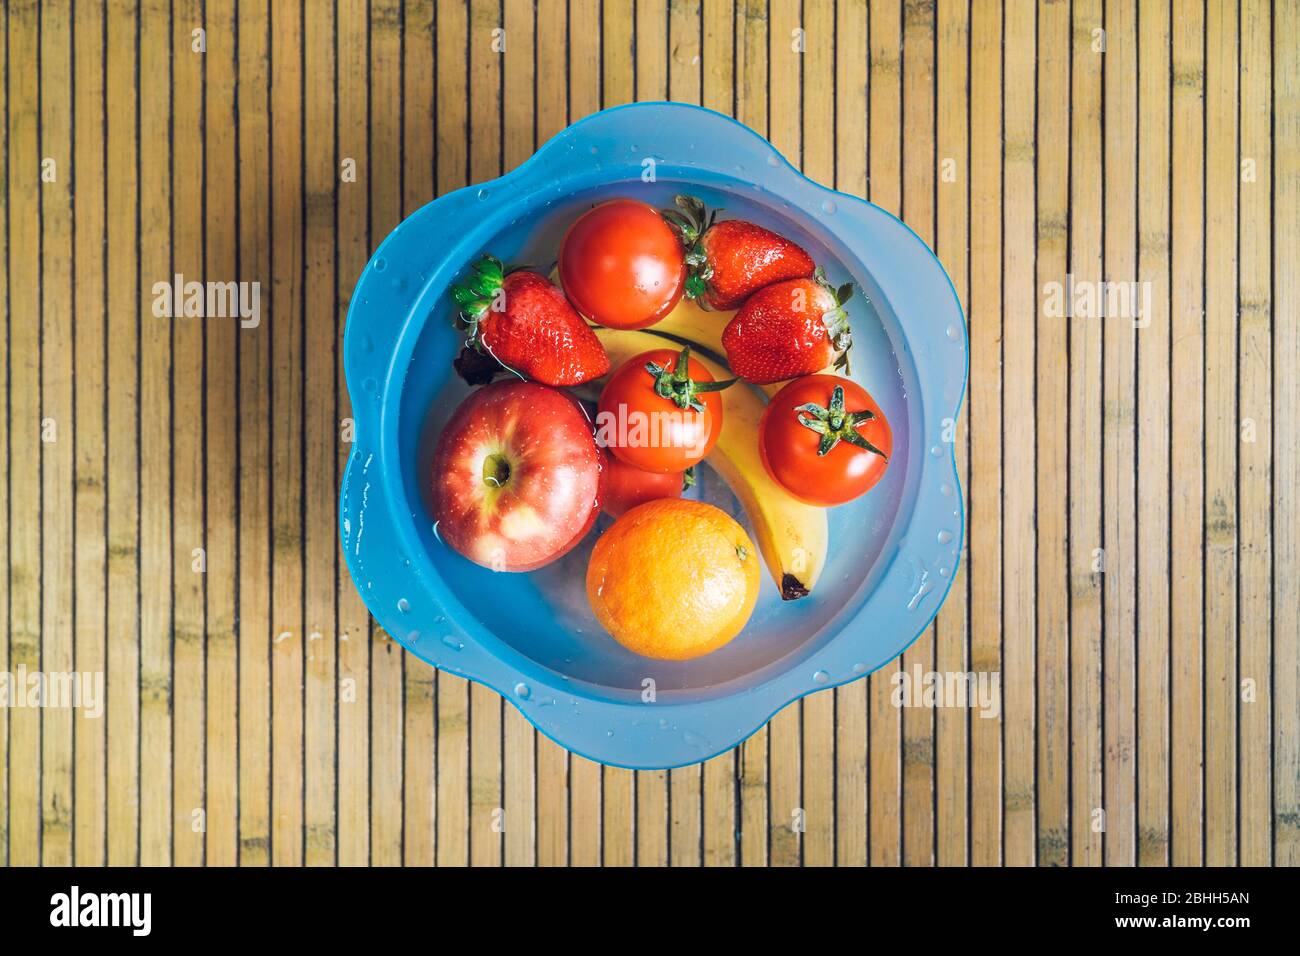 Blue bowl with different fresh and clean fruits on a wooden base. Bananas, tomatoes, apples, strawberries and oranges immersed in the water. Stock Photo